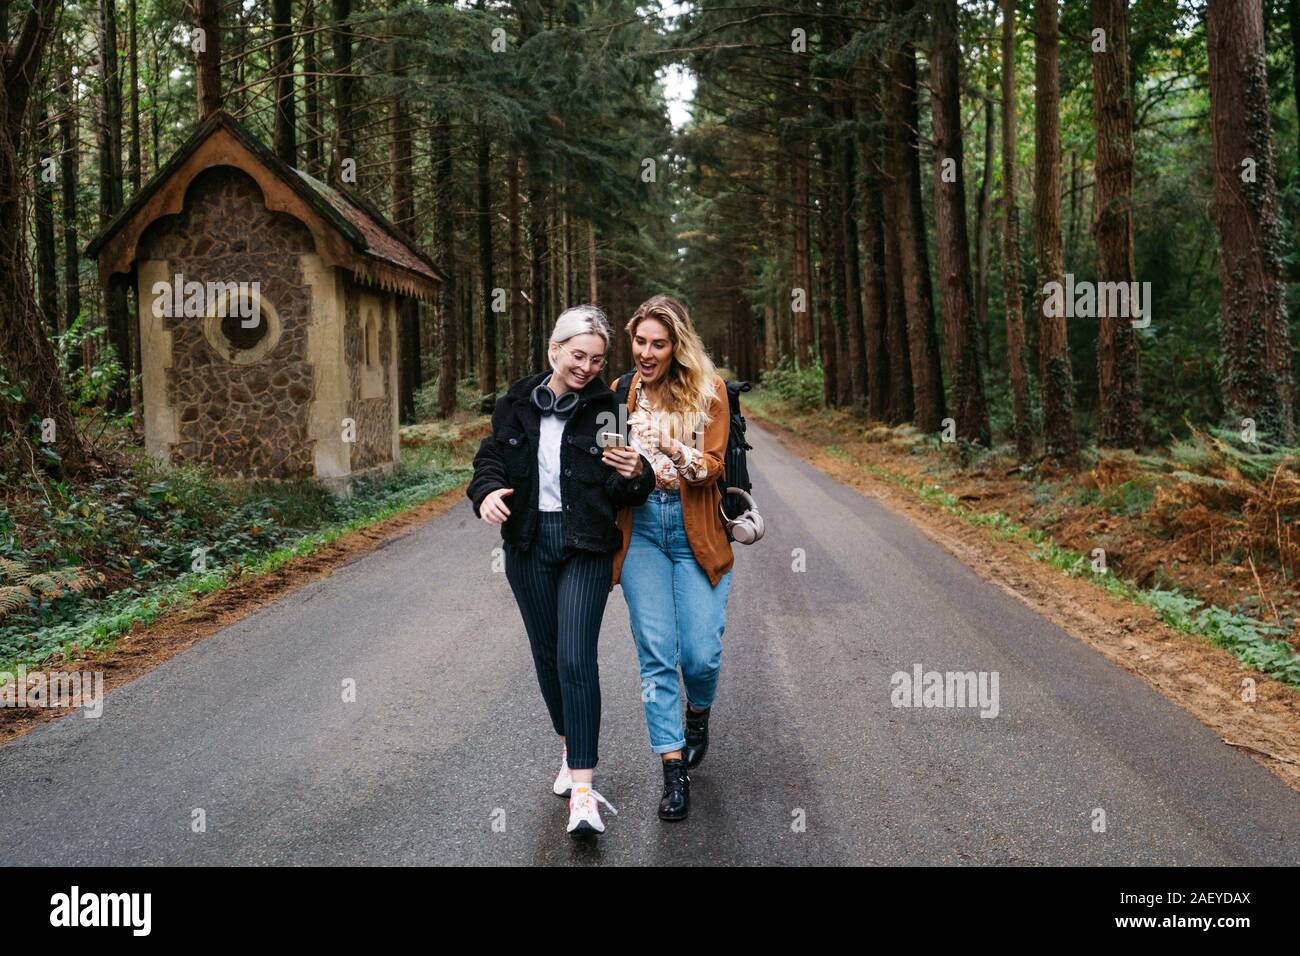 Two women walking down the road looking at their phone and laughing Stock Photo